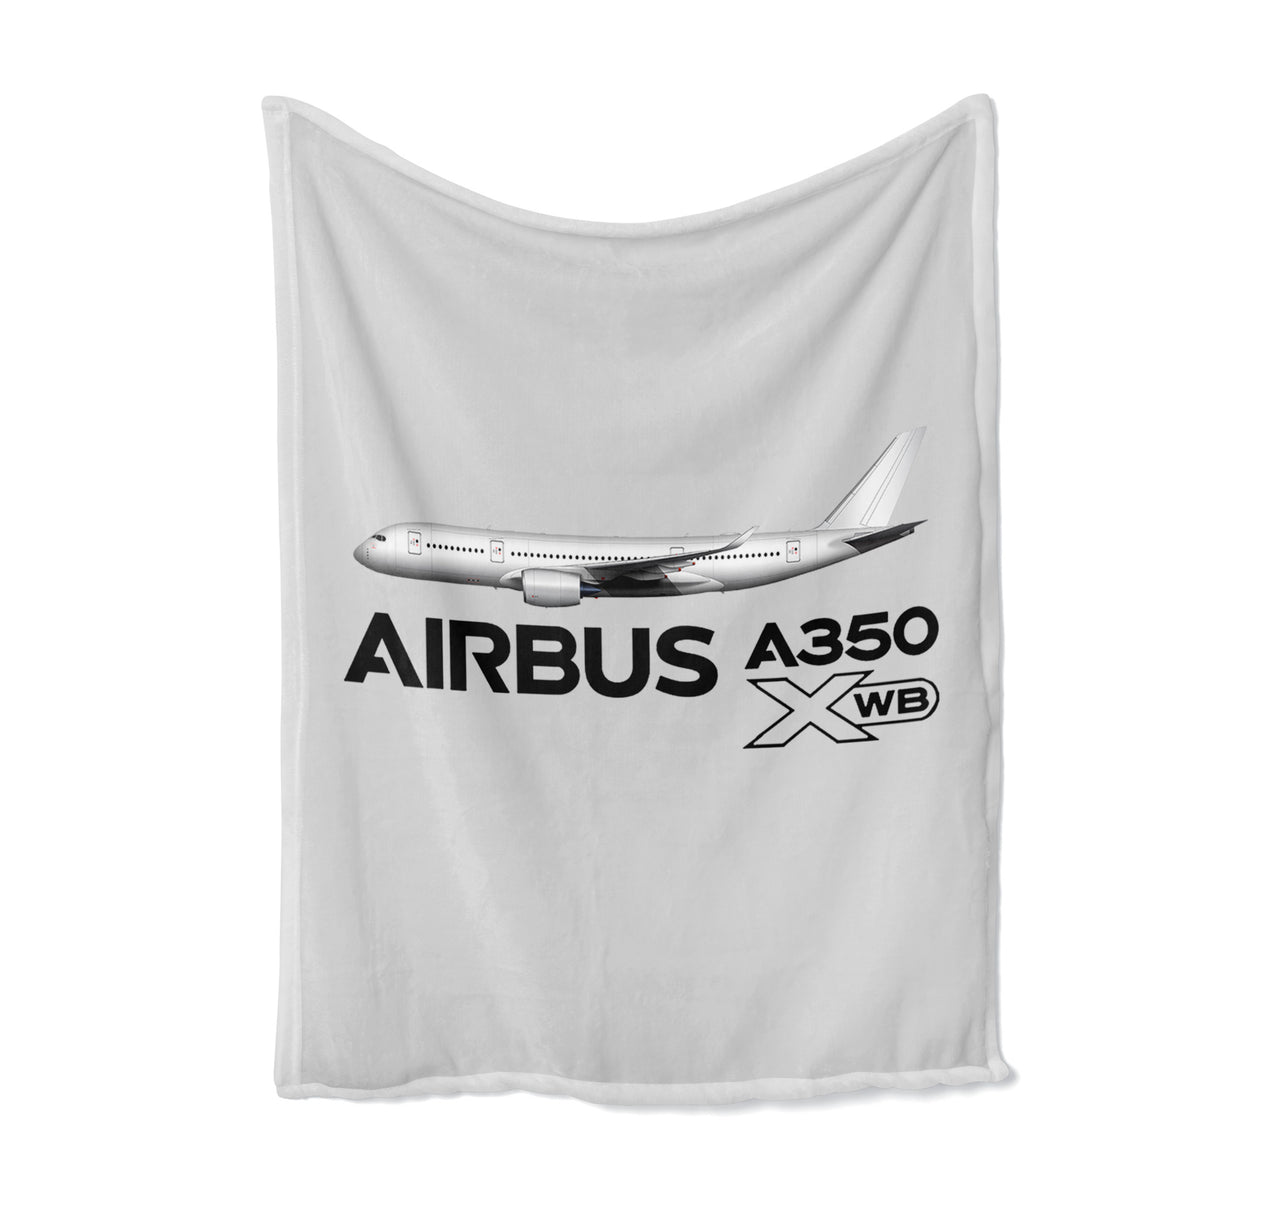 The Airbus A350 WXB Designed Bed Blankets & Covers